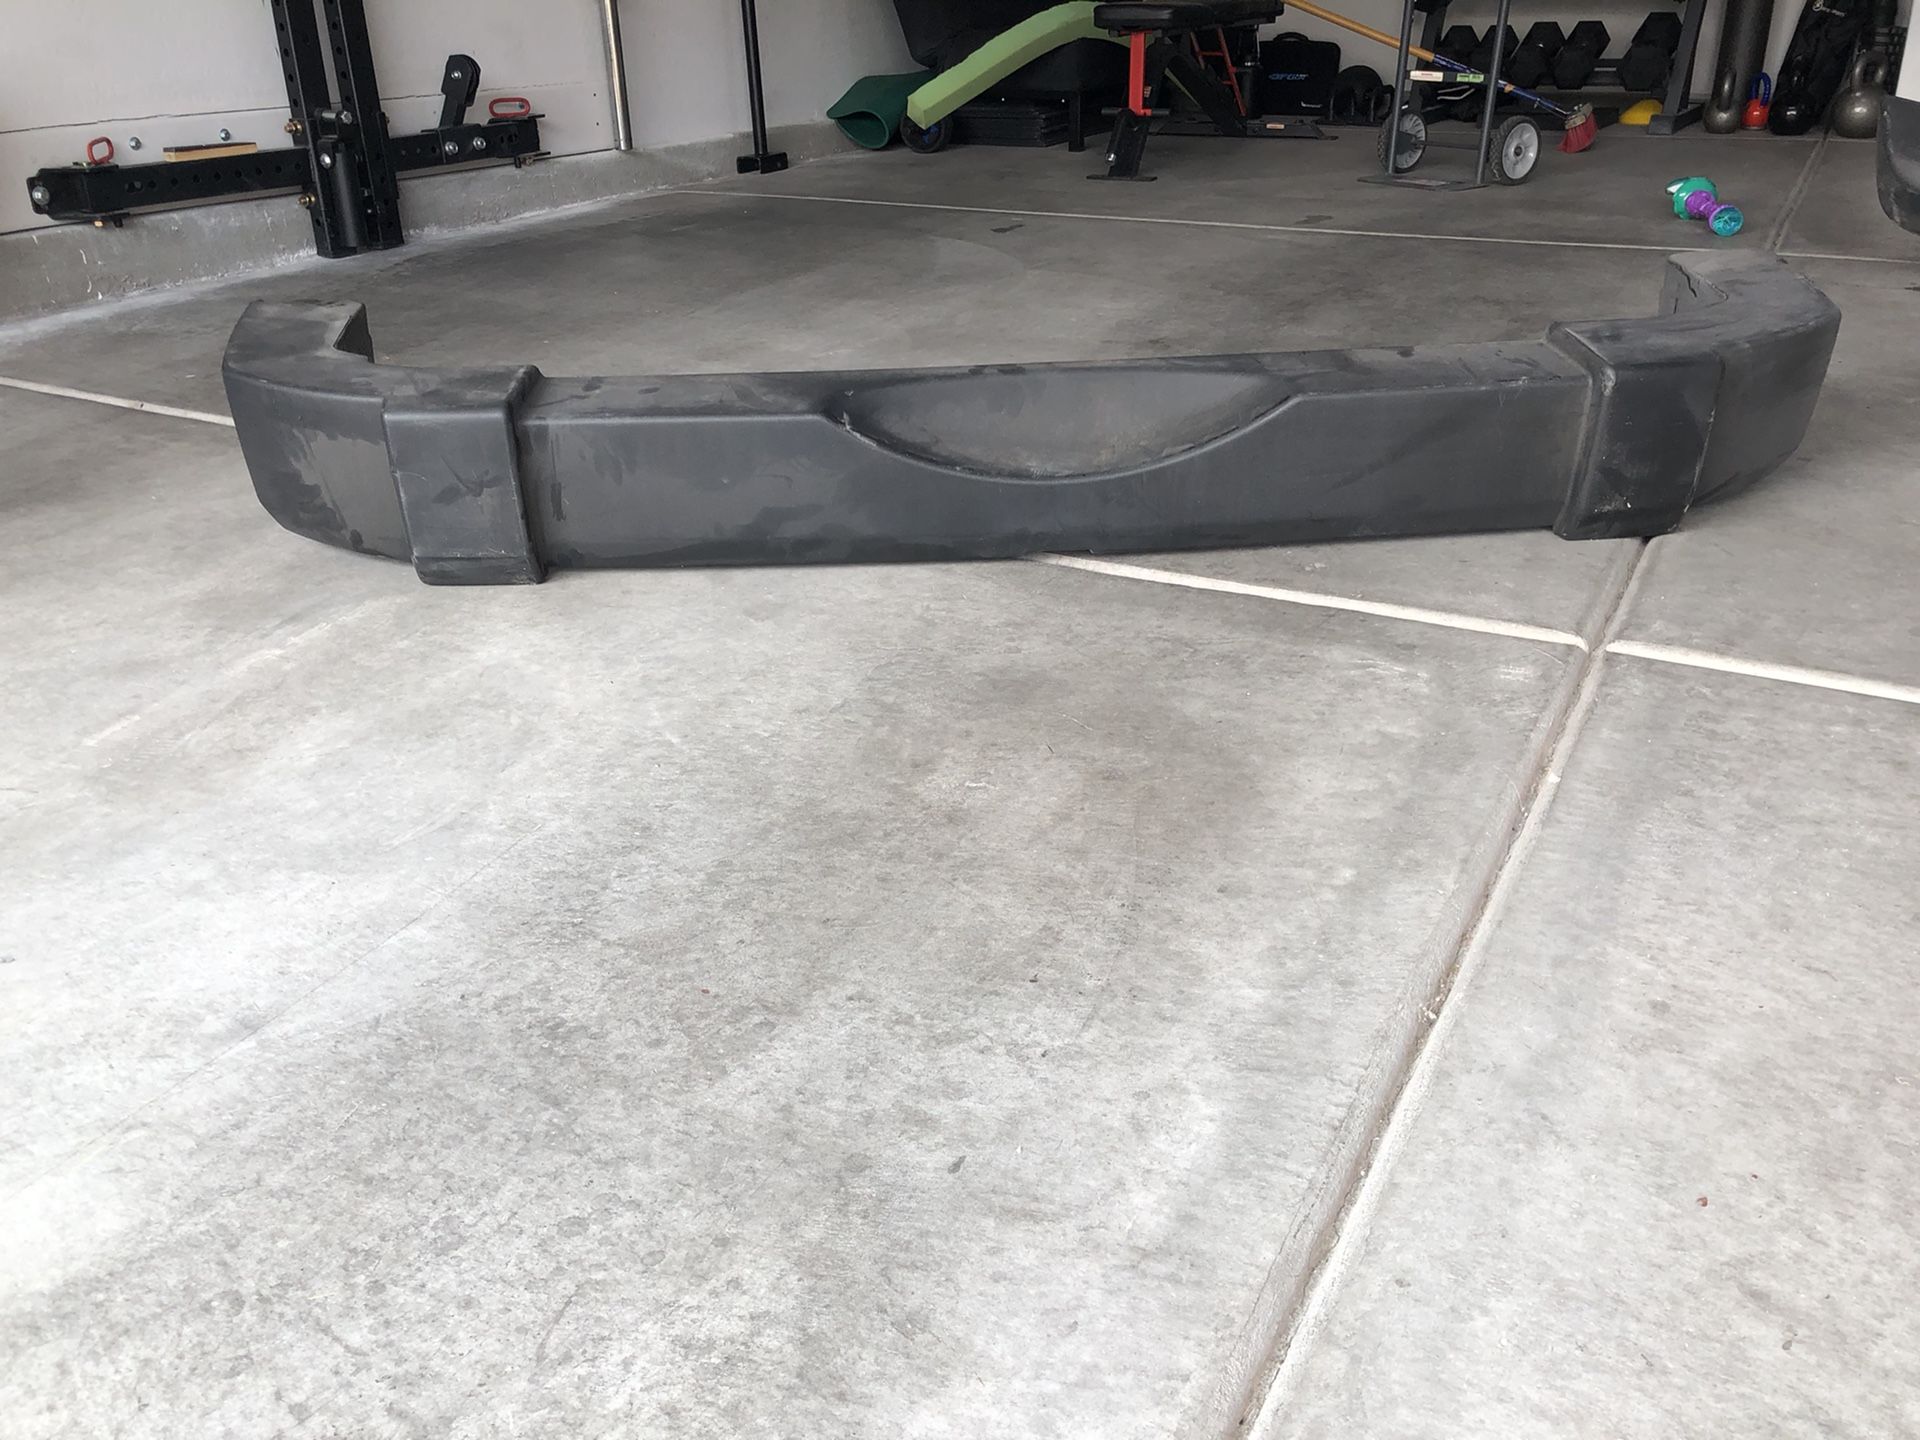 Like new 2017 JK Jeep muffler and exhaust. Plus rear and front bumper